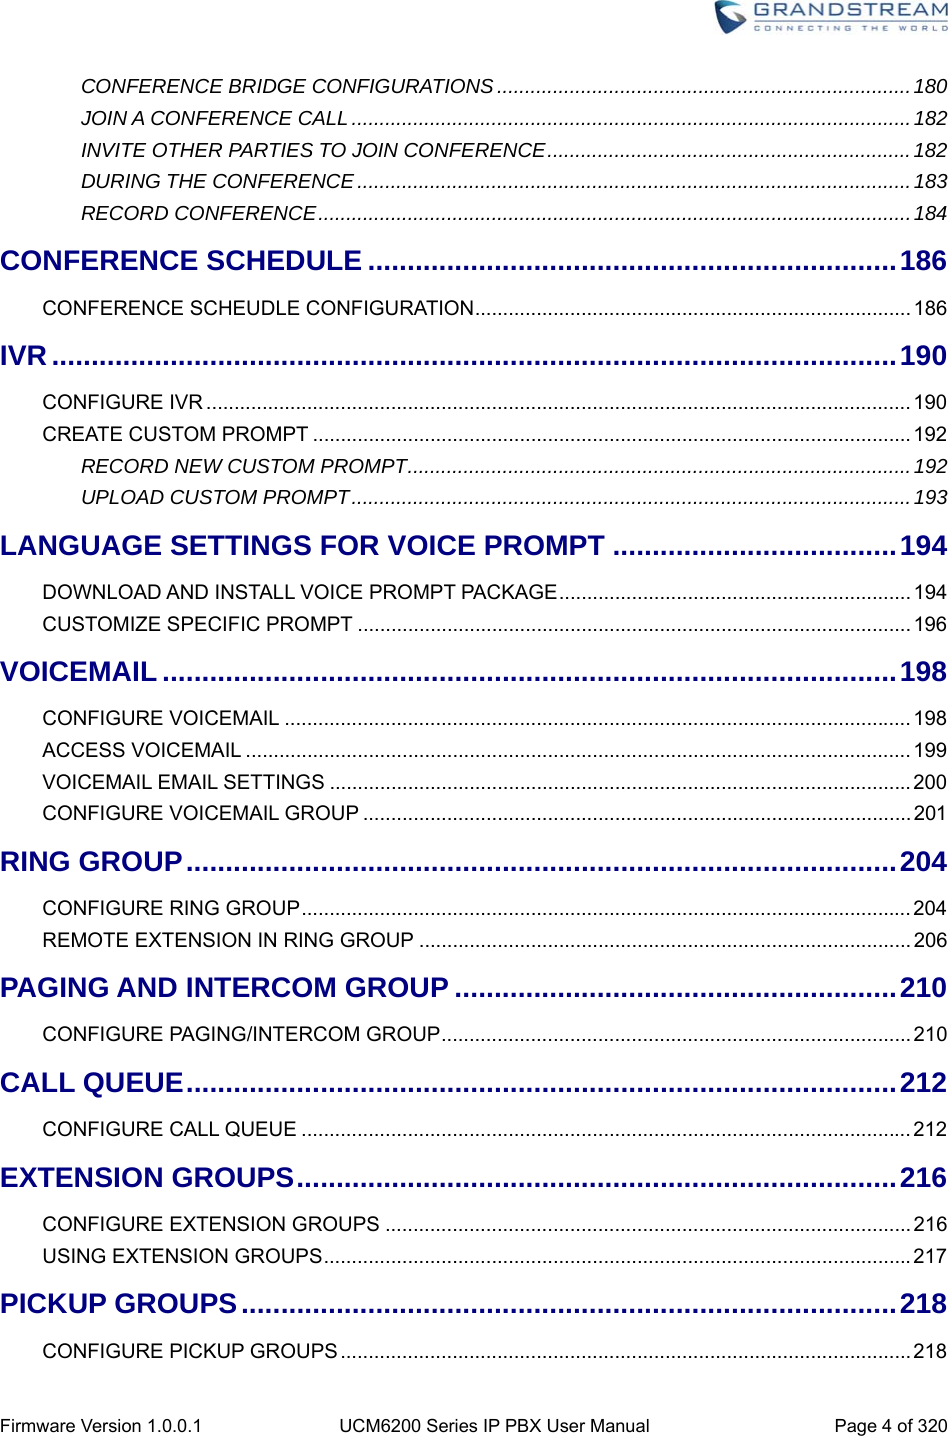  Firmware Version 1.0.0.1  UCM6200 Series IP PBX User Manual  Page 4 of 320 CONFERENCE BRIDGE CONFIGURATIONS .......................................................................... 180JOIN A CONFERENCE CALL .................................................................................................... 182INVITE OTHER PARTIES TO JOIN CONFERENCE ................................................................. 182DURING THE CONFERENCE ................................................................................................... 183RECORD CONFERENCE .......................................................................................................... 184CONFERENCE SCHEDULE ................................................................... 186CONFERENCE SCHEUDLE CONFIGURATION .............................................................................. 186IVR ........................................................................................................... 190CONFIGURE IVR .............................................................................................................................. 190CREATE CUSTOM PROMPT ........................................................................................................... 192RECORD NEW CUSTOM PROMPT .......................................................................................... 192UPLOAD CUSTOM PROMPT .................................................................................................... 193LANGUAGE SETTINGS FOR VOICE PROMPT .................................... 194DOWNLOAD AND INSTALL VOICE PROMPT PACKAGE ............................................................... 194CUSTOMIZE SPECIFIC PROMPT ................................................................................................... 196VOICEMAIL ............................................................................................. 198CONFIGURE VOICEMAIL ................................................................................................................ 198ACCESS VOICEMAIL ....................................................................................................................... 199VOICEMAIL EMAIL SETTINGS ........................................................................................................ 200CONFIGURE VOICEMAIL GROUP .................................................................................................. 201RING GROUP .......................................................................................... 204CONFIGURE RING GROUP ............................................................................................................. 204REMOTE EXTENSION IN RING GROUP ........................................................................................ 206PAGING AND INTERCOM GROUP ........................................................ 210CONFIGURE PAGING/INTERCOM GROUP .................................................................................... 210CALL QUEUE .......................................................................................... 212CONFIGURE CALL QUEUE ............................................................................................................. 212EXTENSION GROUPS ............................................................................ 216CONFIGURE EXTENSION GROUPS .............................................................................................. 216USING EXTENSION GROUPS ......................................................................................................... 217PICKUP GROUPS ................................................................................... 218CONFIGURE PICKUP GROUPS ...................................................................................................... 218